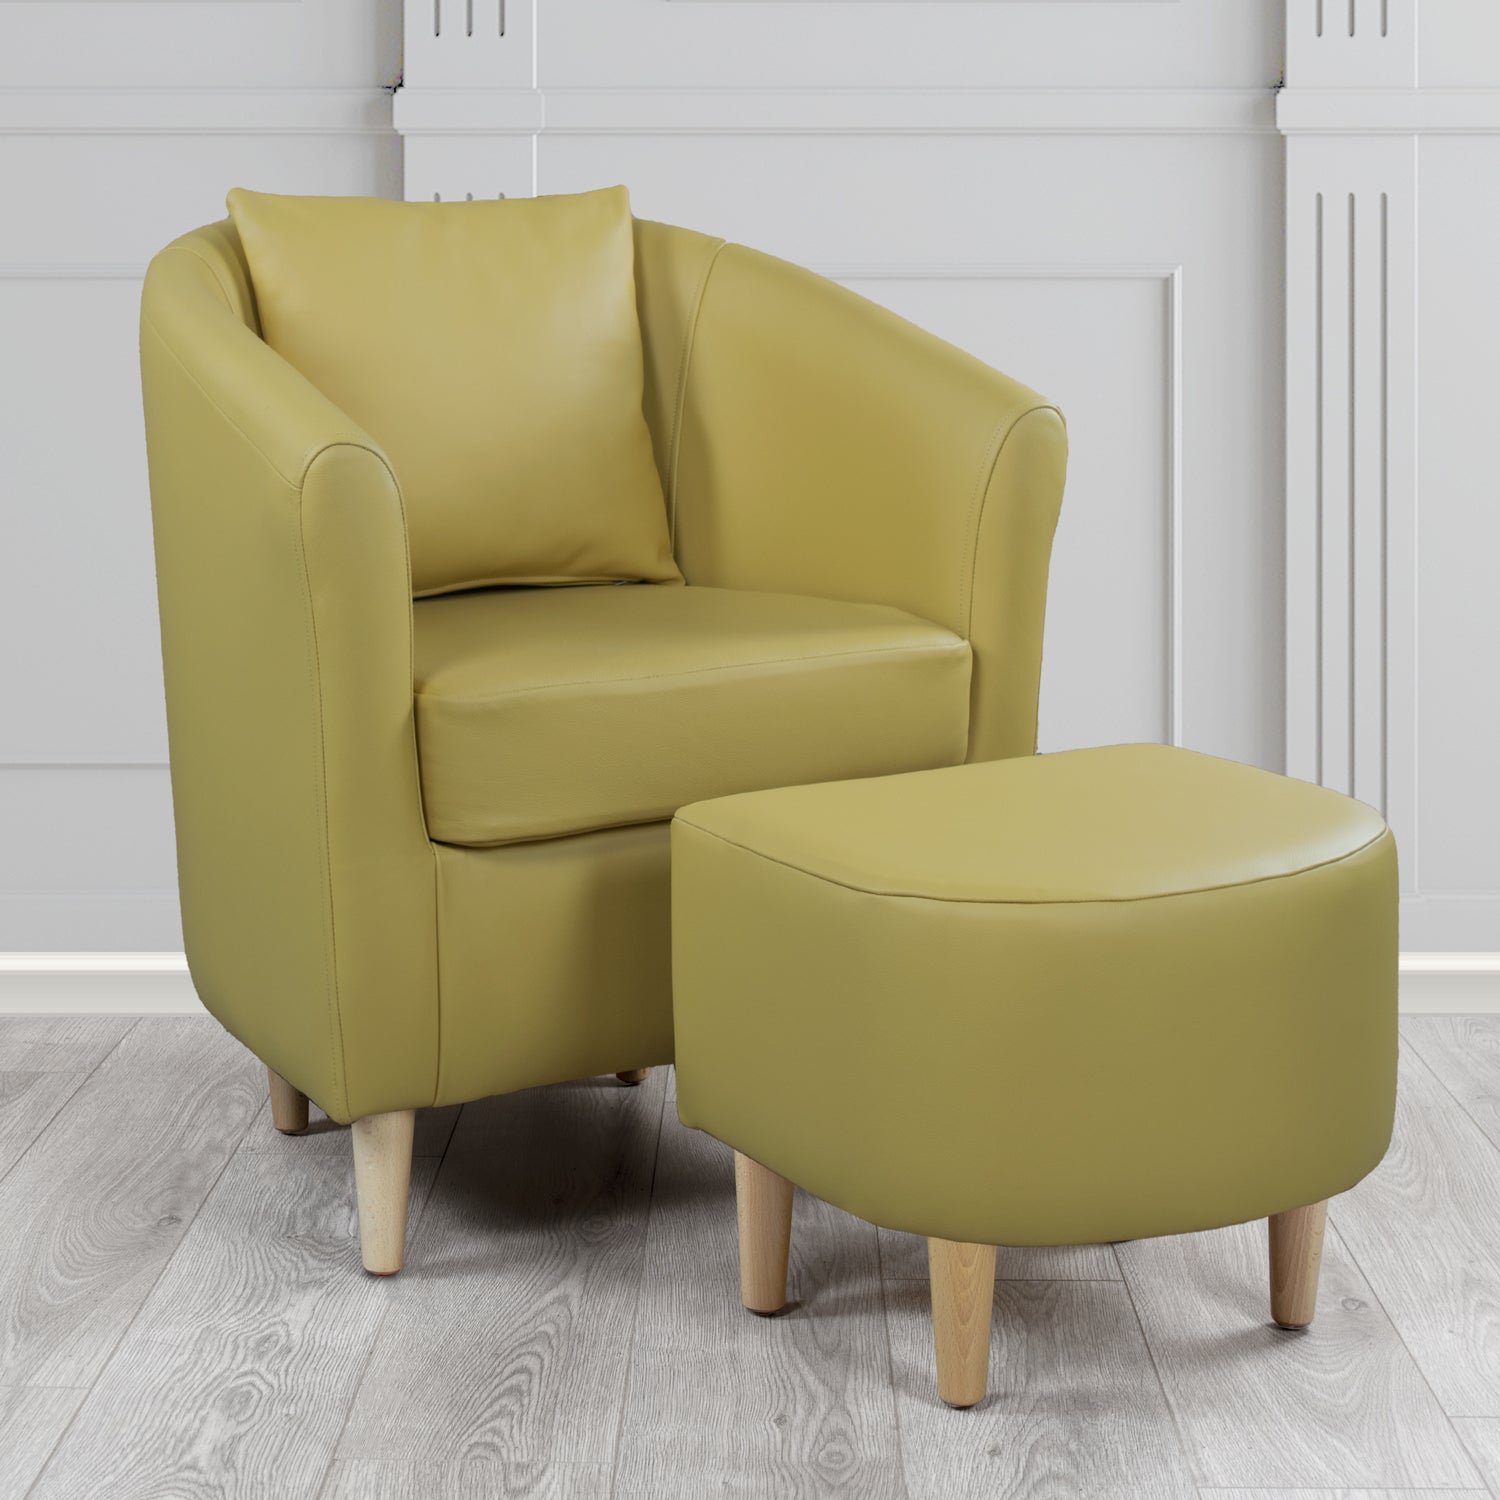 St Tropez Shelly Golders Green Crib 5 Genuine Leather Tub Chair & Footstool Set With Scatter Cushion (6619499528234)